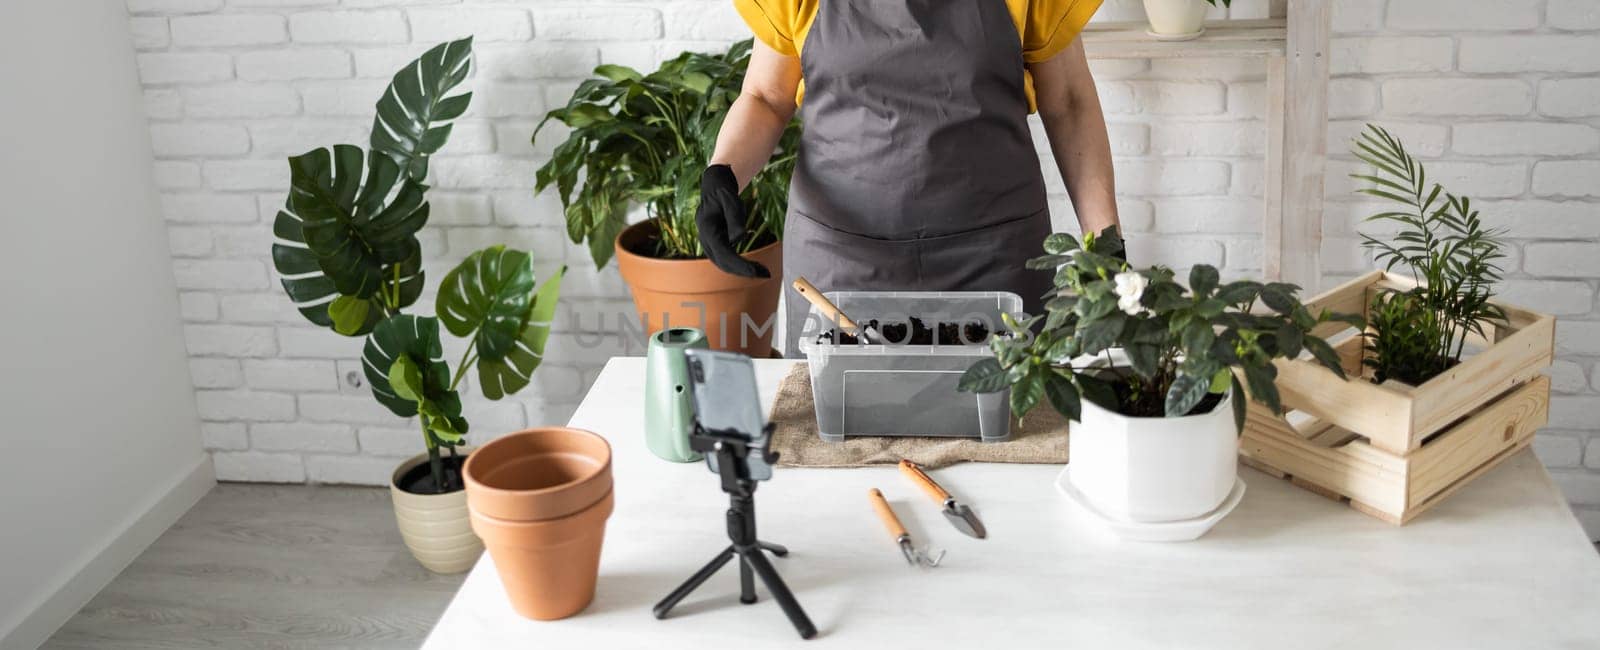 Relaxing home gardening banner. Smiling middle aged woman in black gloves with potted plant records gardening video blog in modern house - blogging and florist vlog influencer by Satura86